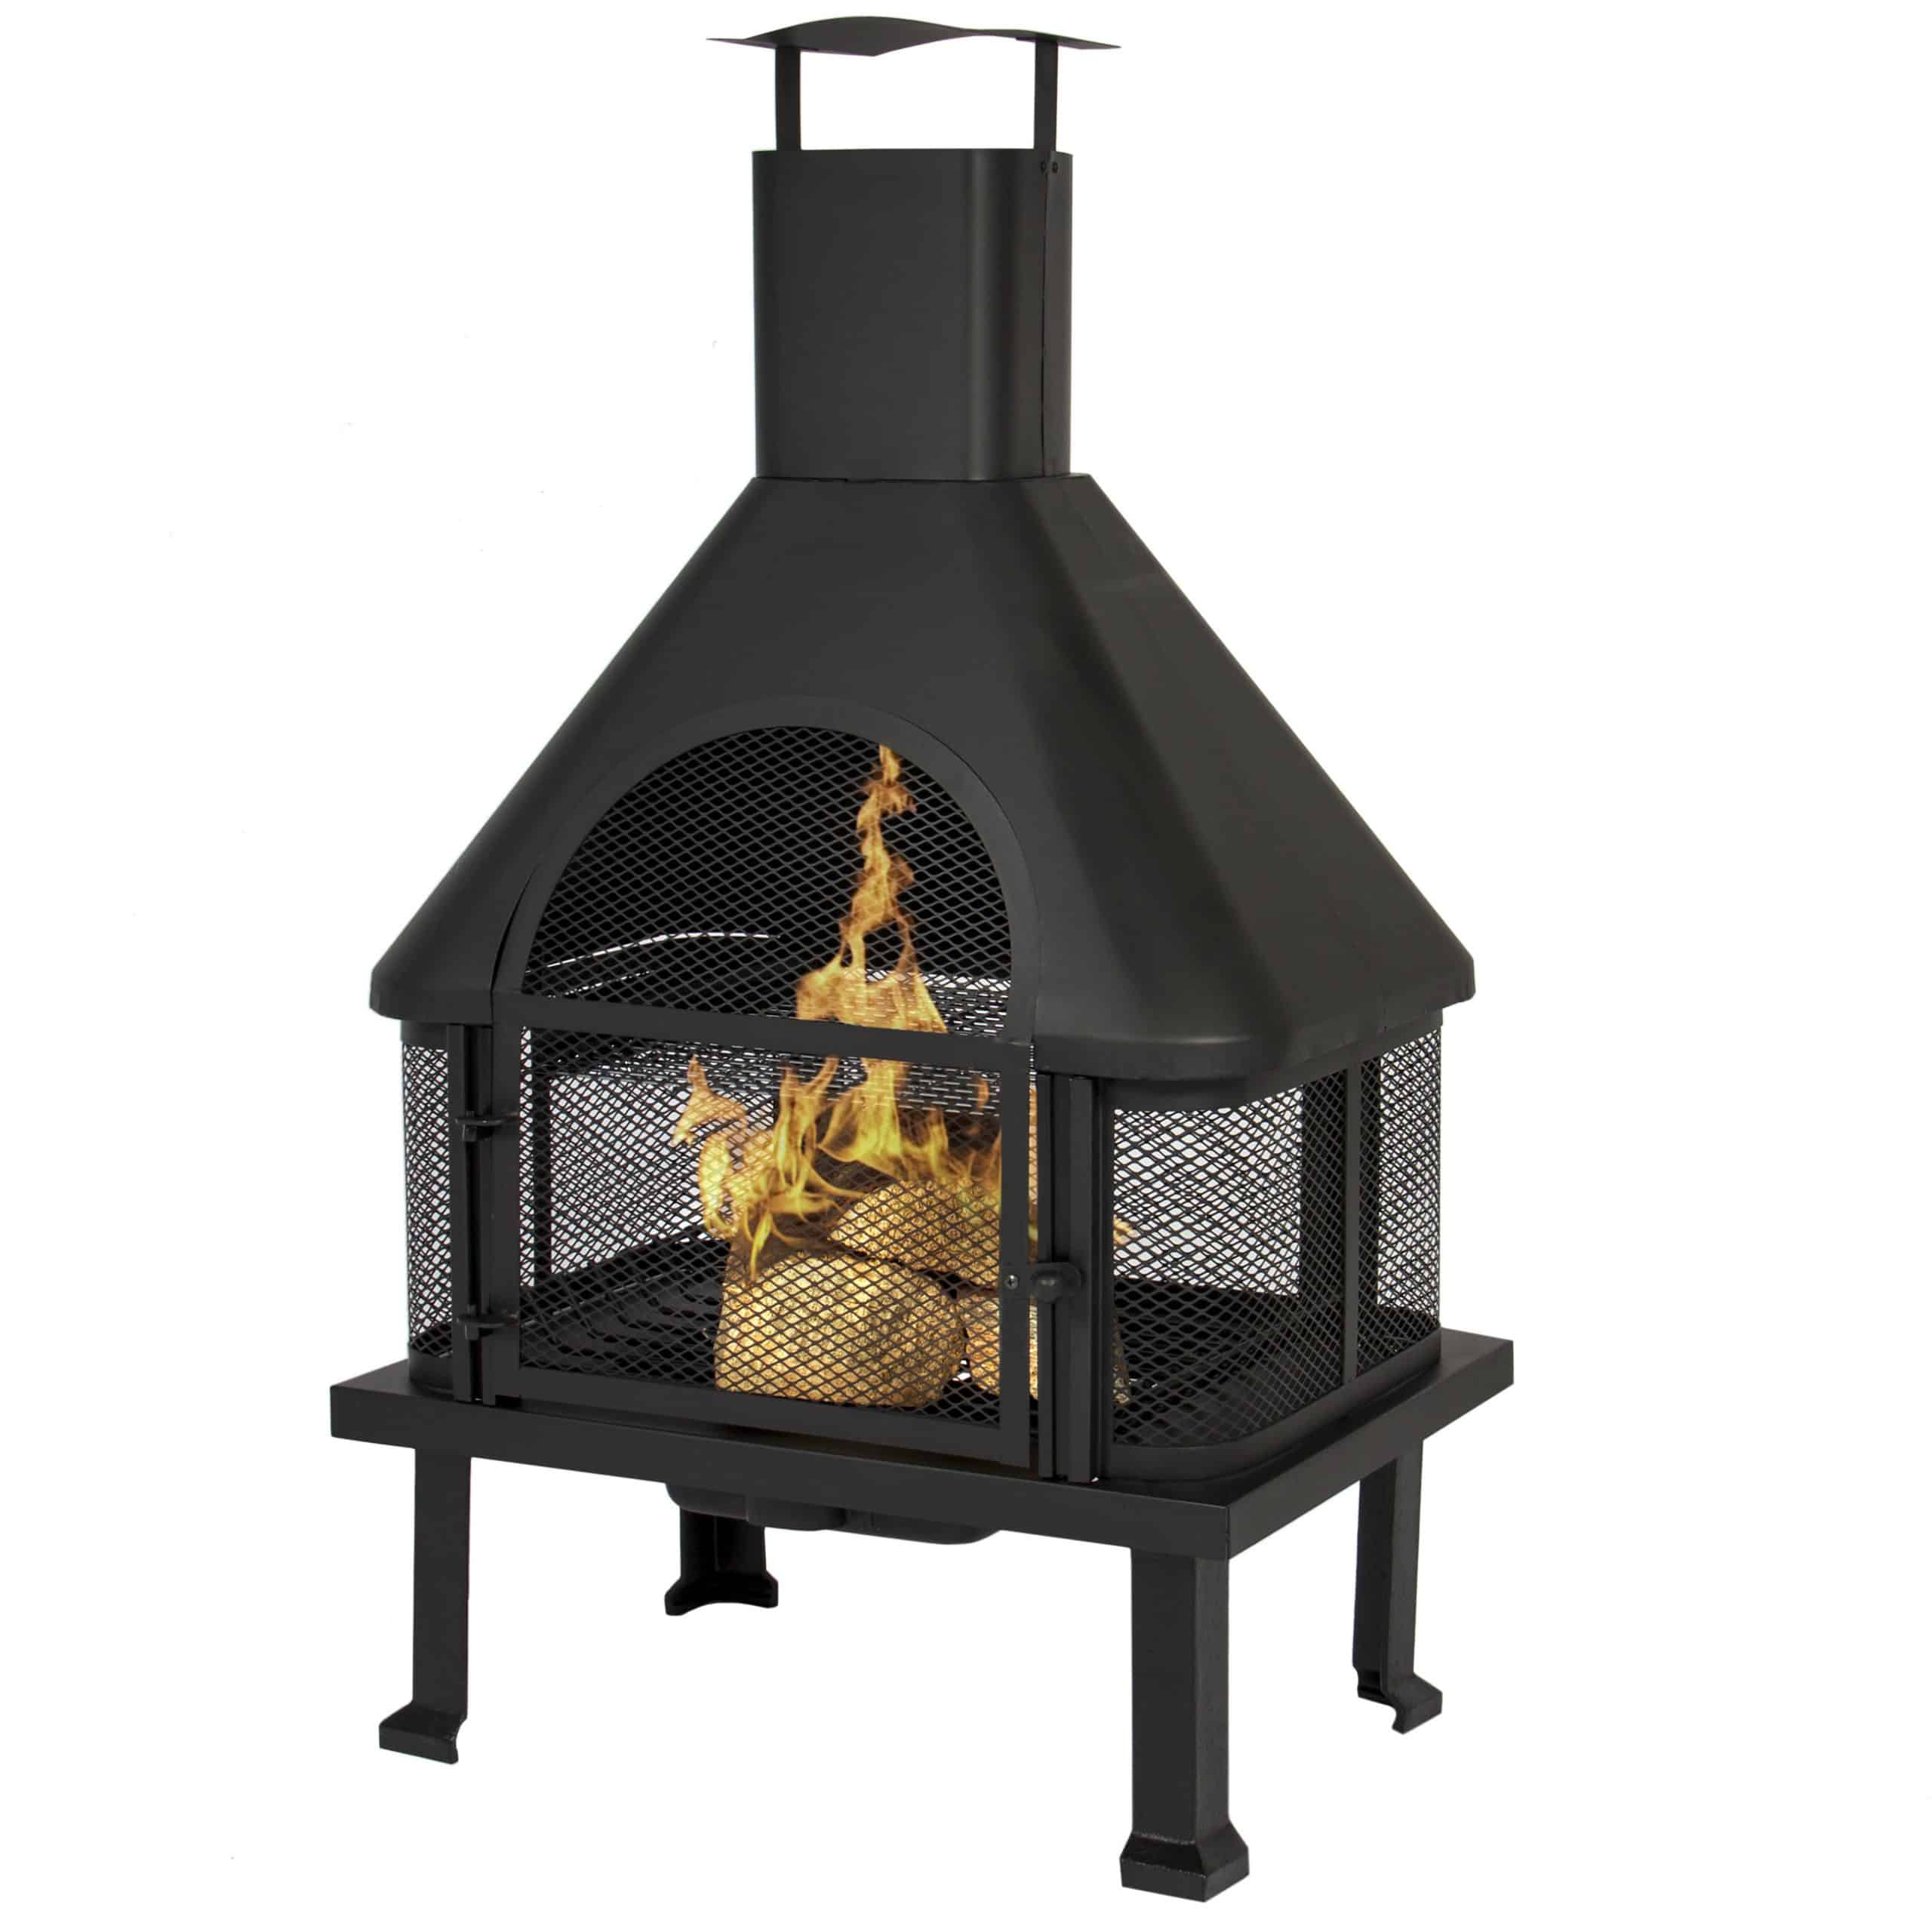 BCP Firehouse Fire Pit With Chimney Outdoor Backyard Deck Fireplace ...